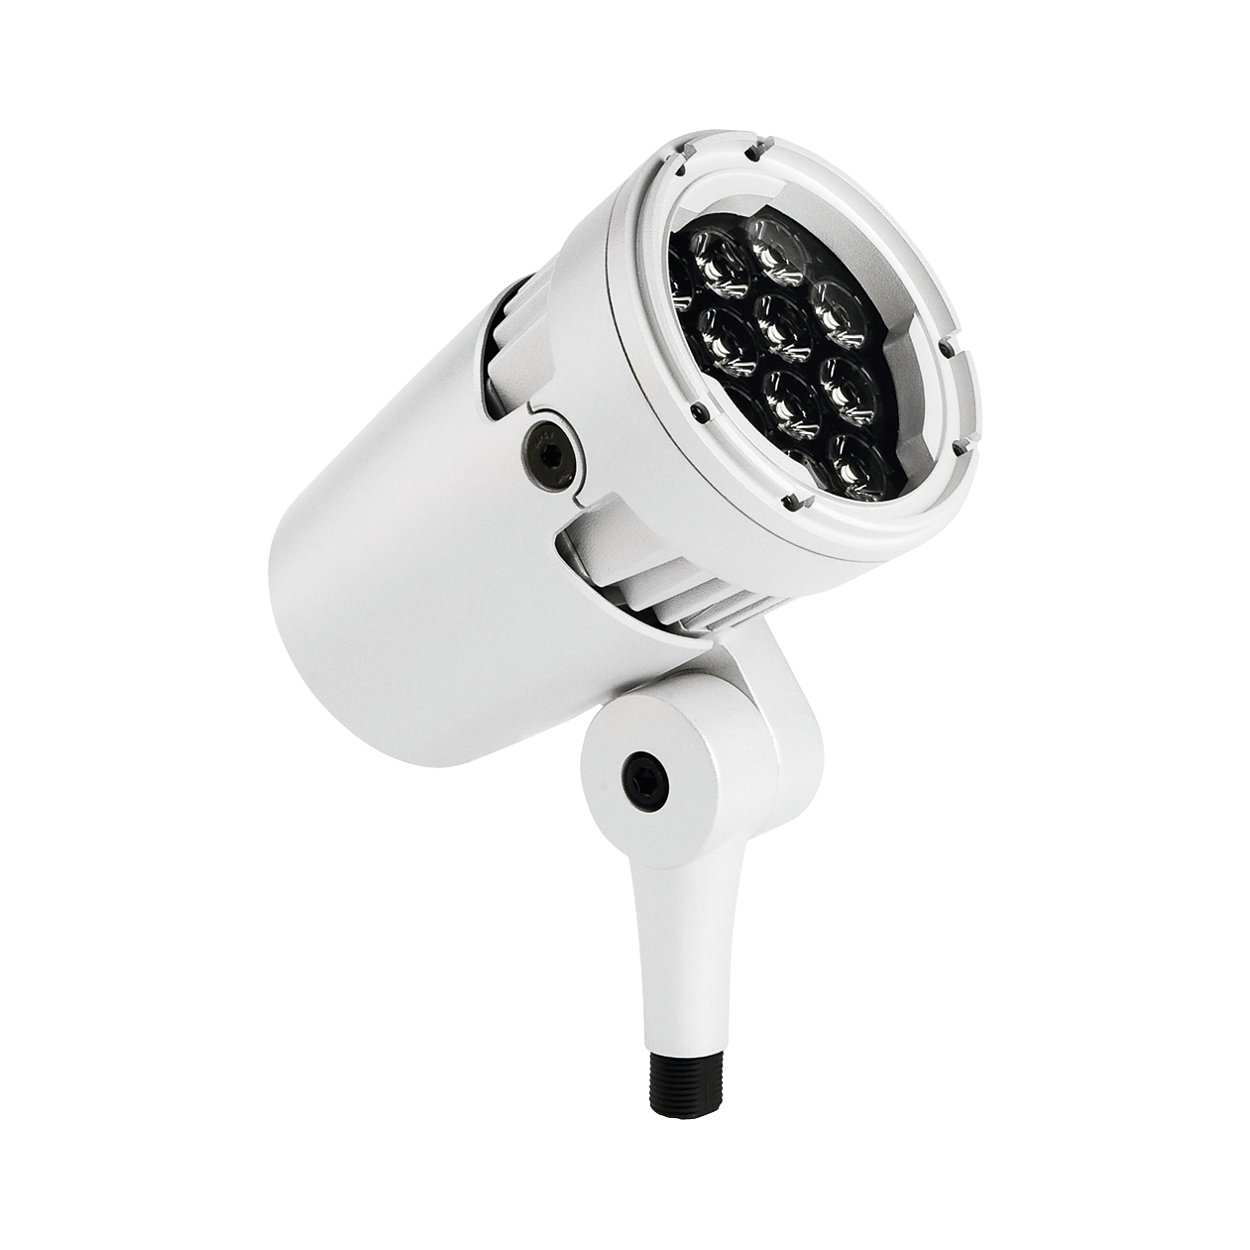 eColor Burst Compact Powercore - Compact architectural and landscape LED spotlight with solid color light